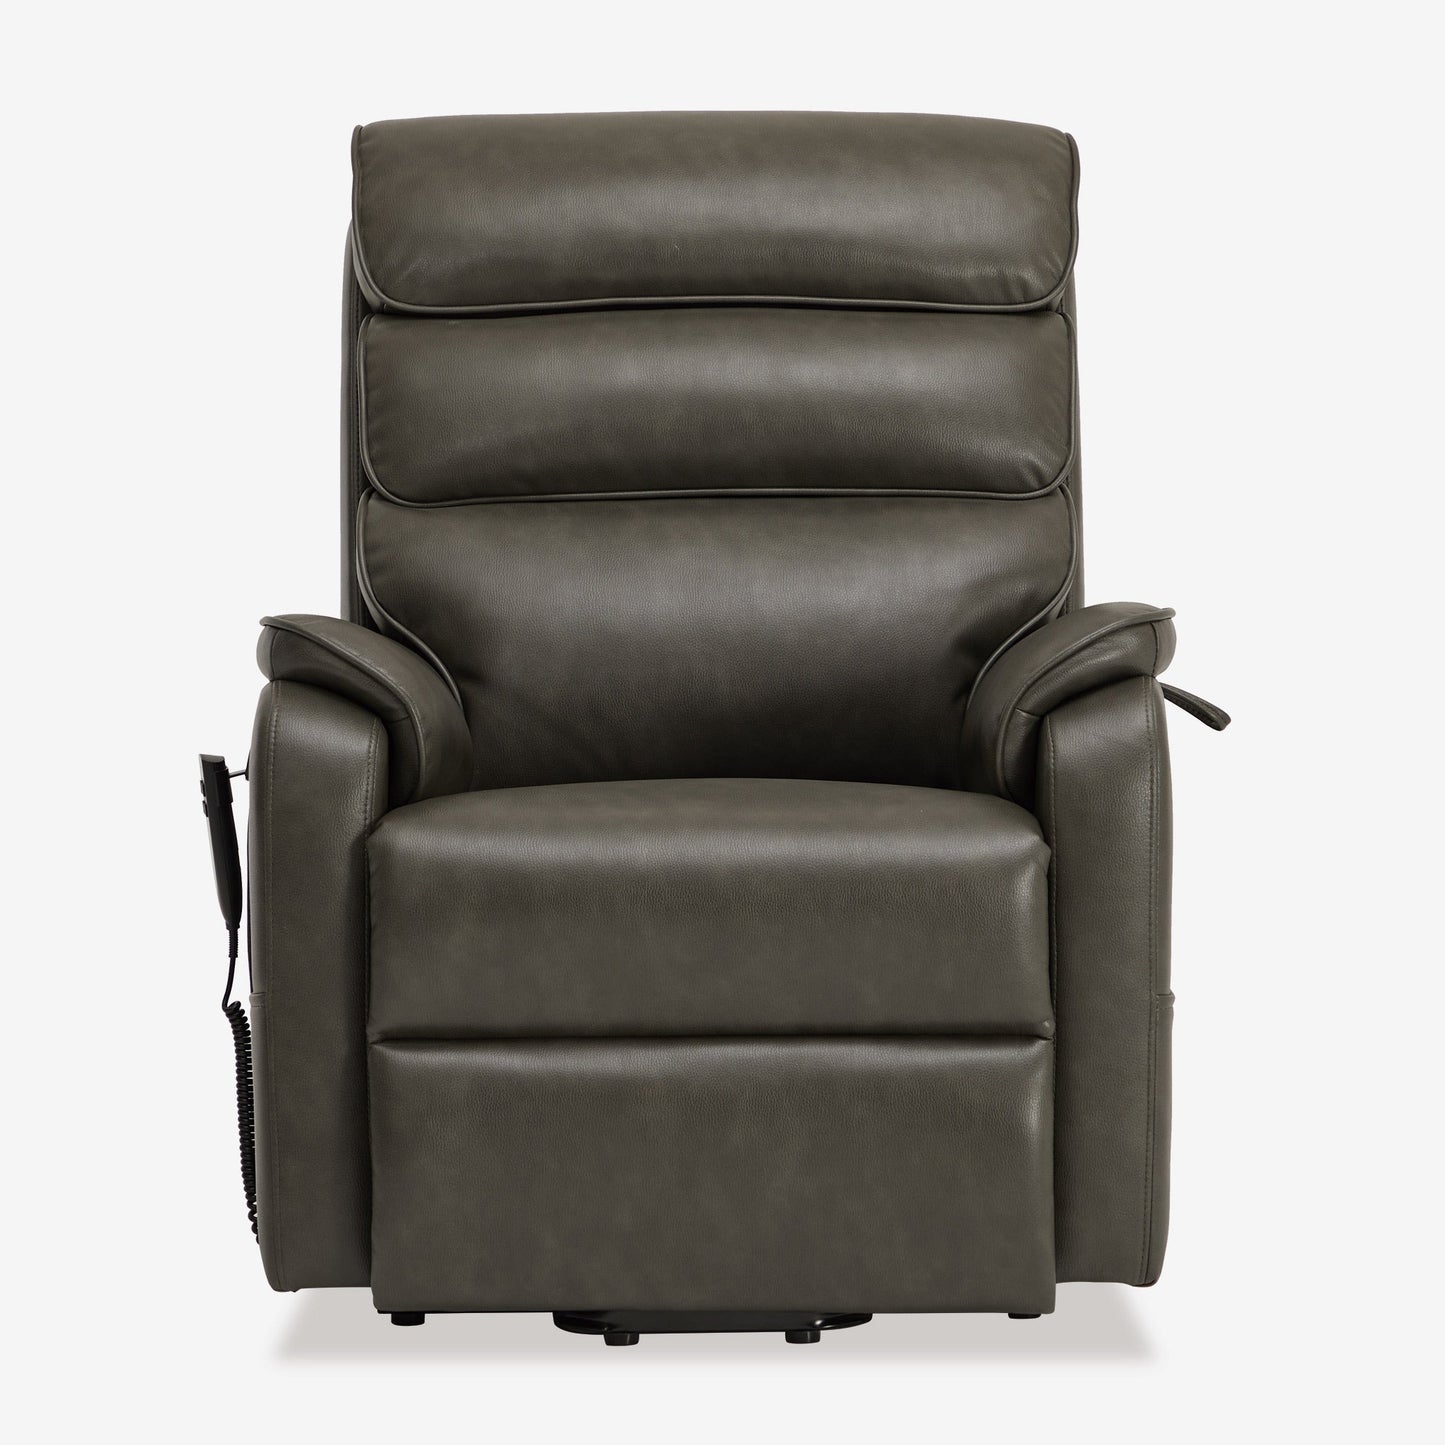 Flat Recliner Chair With Heat Massage And Infinite Positons